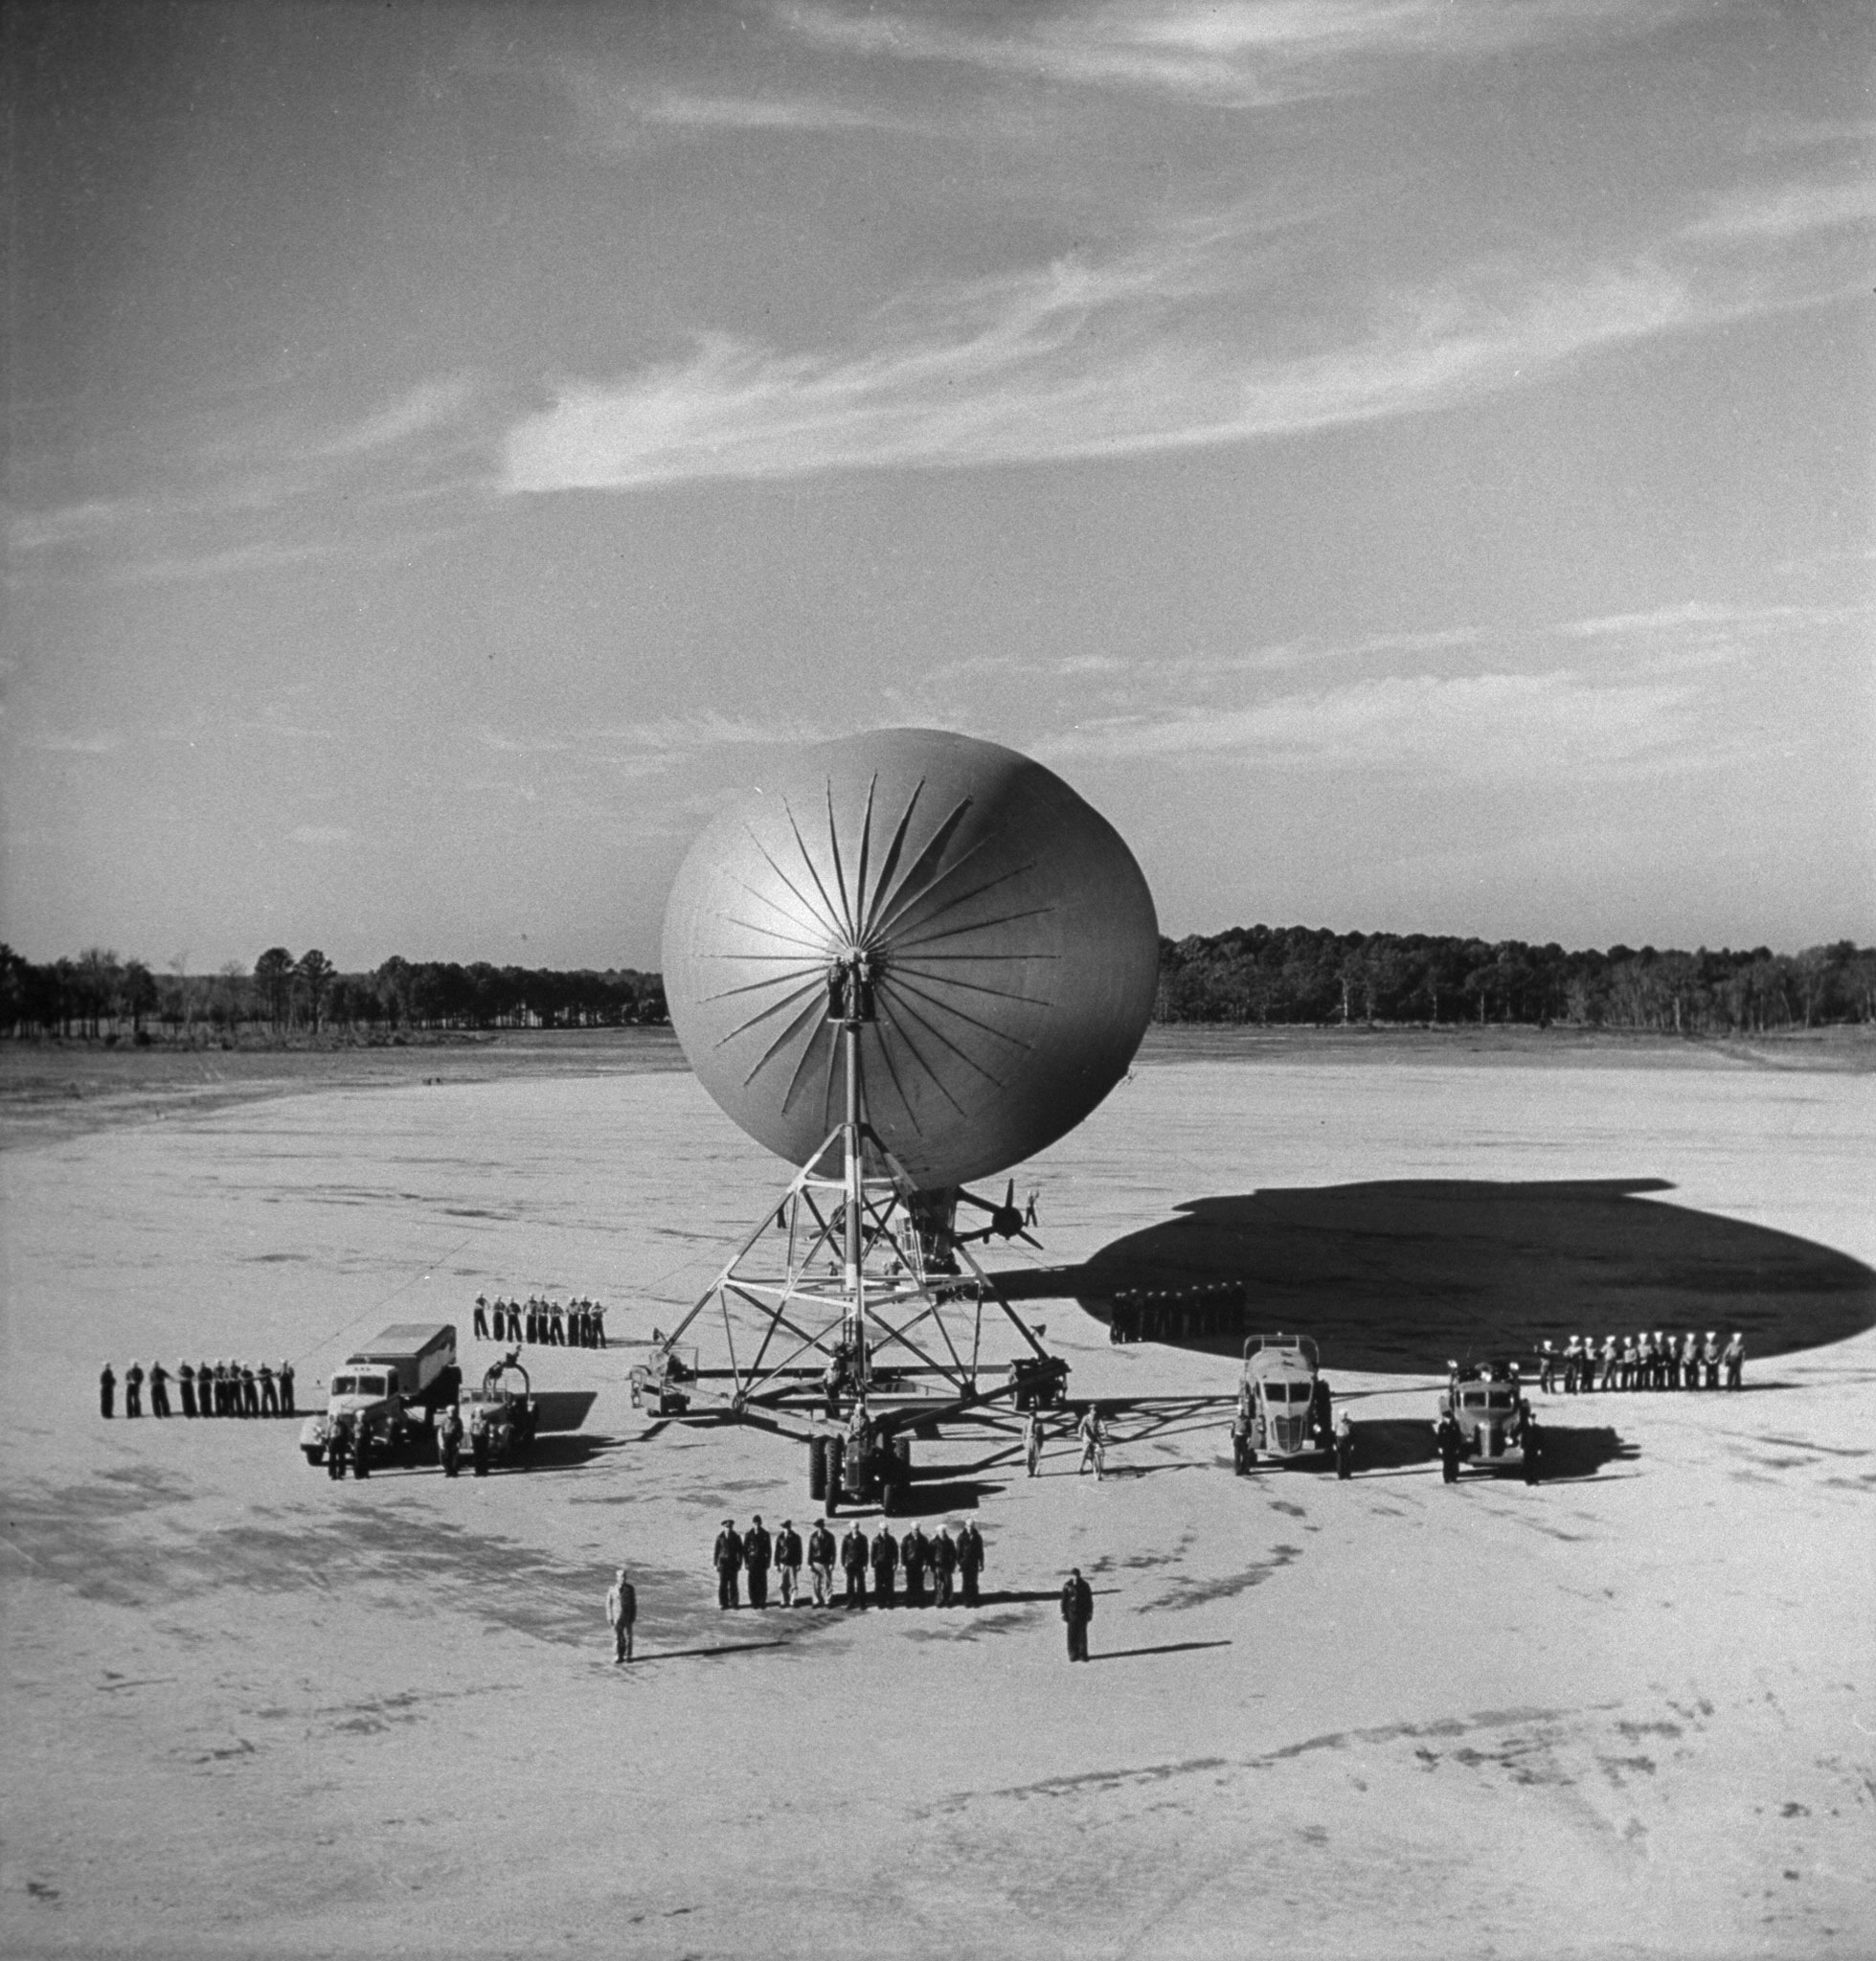 A blimp lands at a Naval air station in 1942.